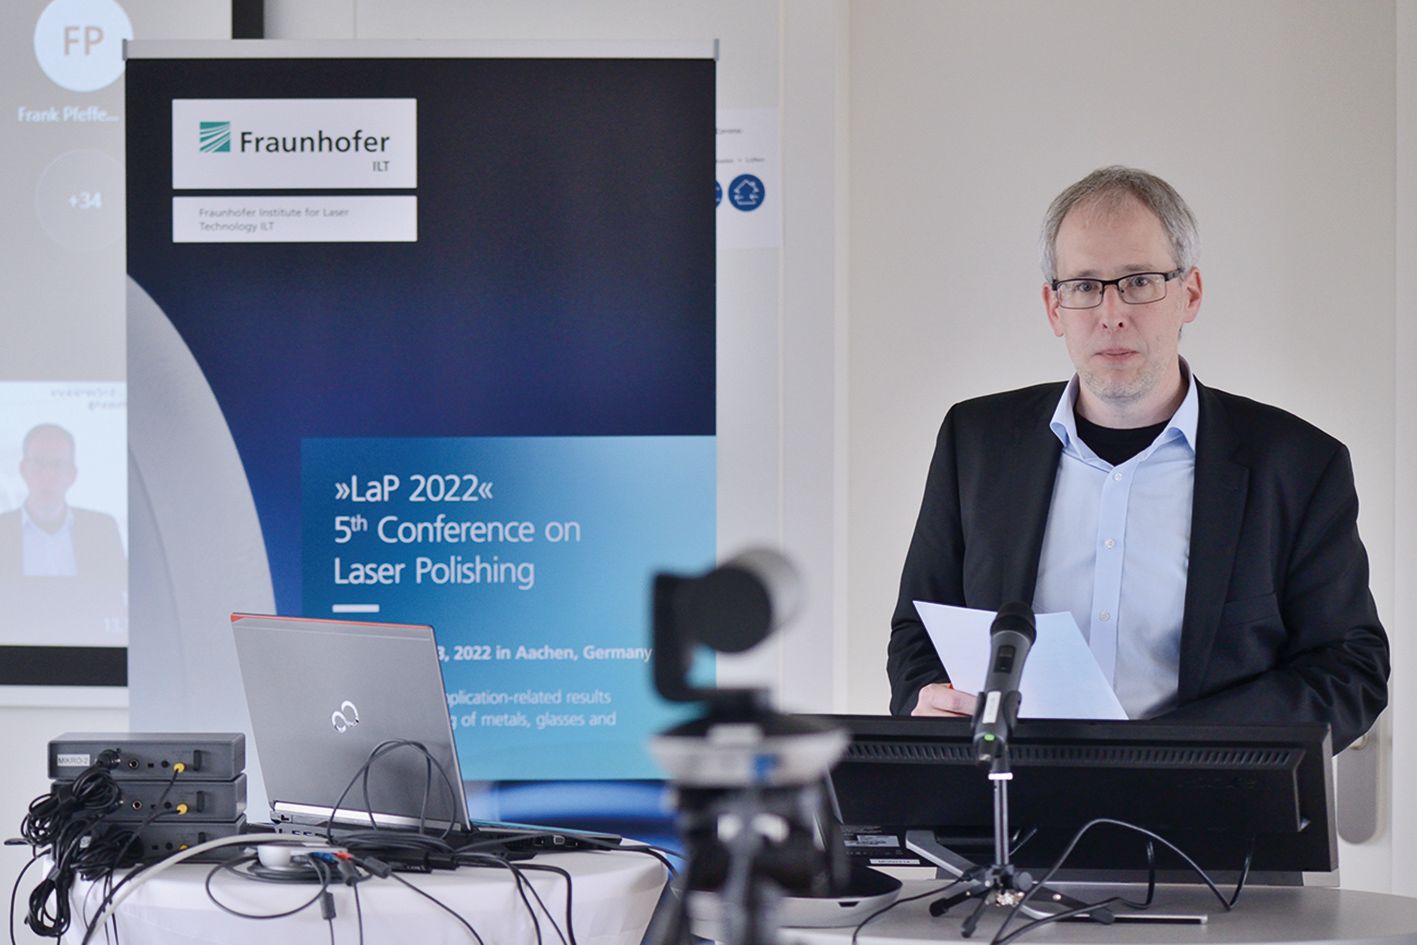 LaP initiator and moderator Dr. Edgar Willenborg, Fraunhofer ILT: “Sixteen presentations covered various aspects over two days, from glass polishing for optics to melt-bath analysis in a synchrotron. We had 70 participants, the mix makes the difference.”